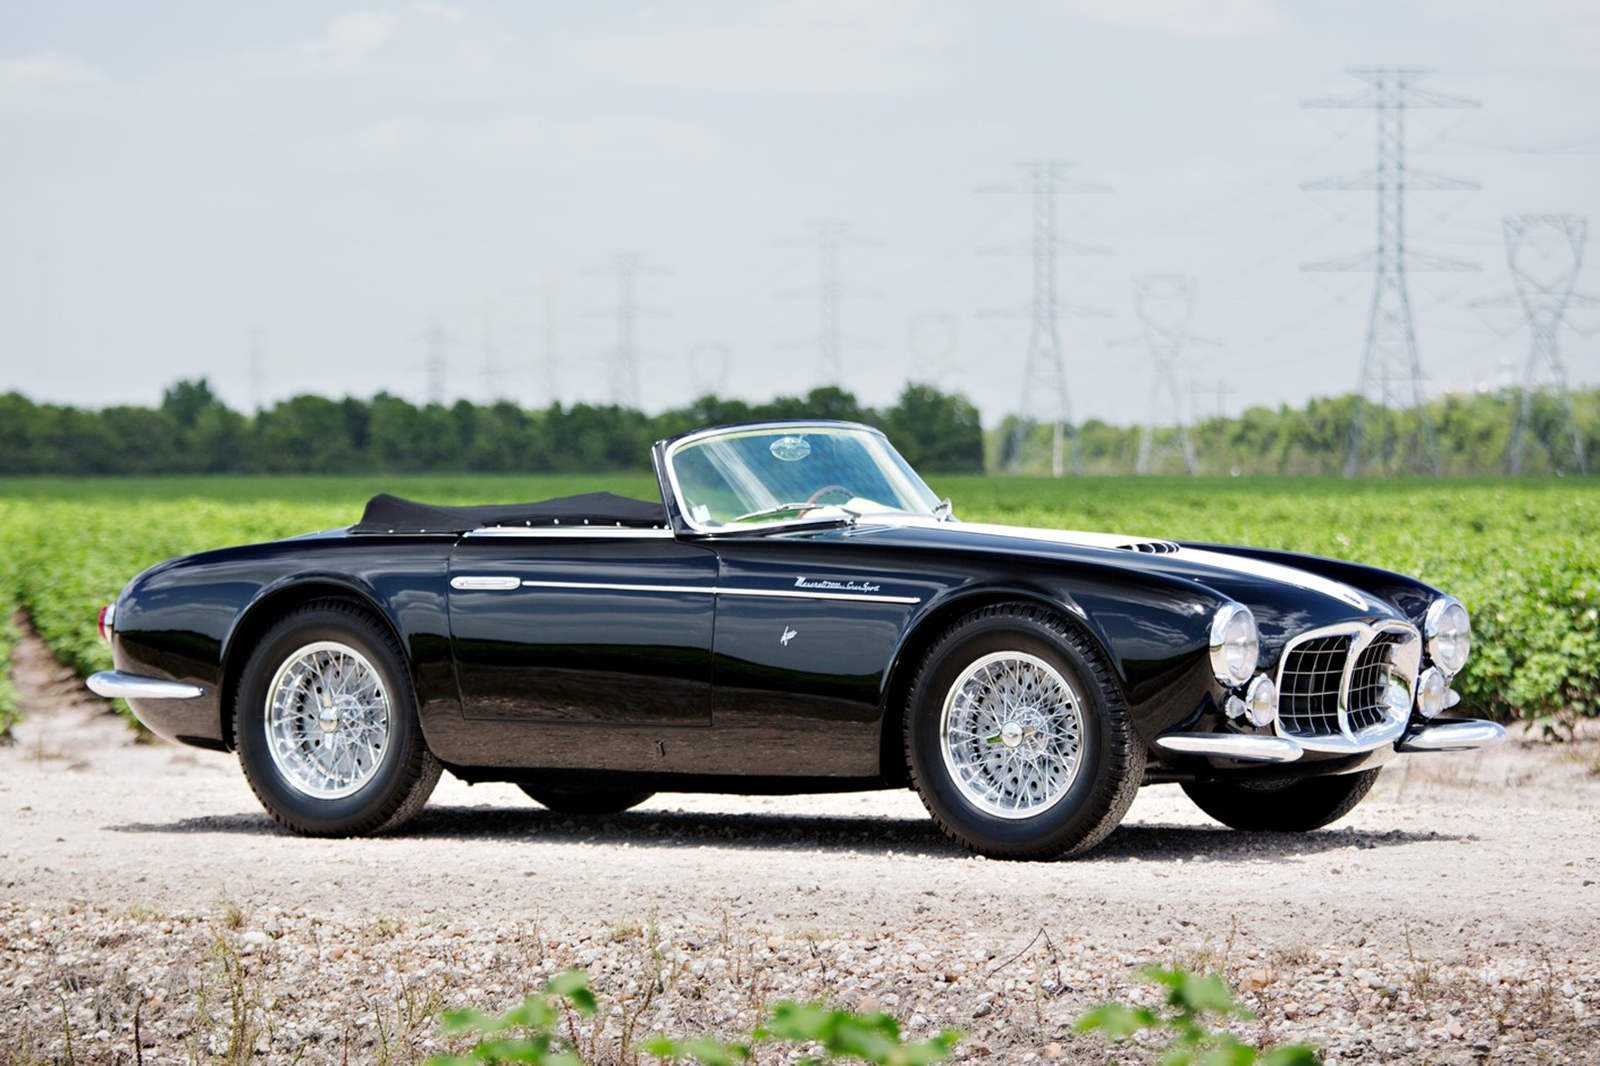 Classic & Sports Car – One-of-three Maserati to star at Concours of Elegance